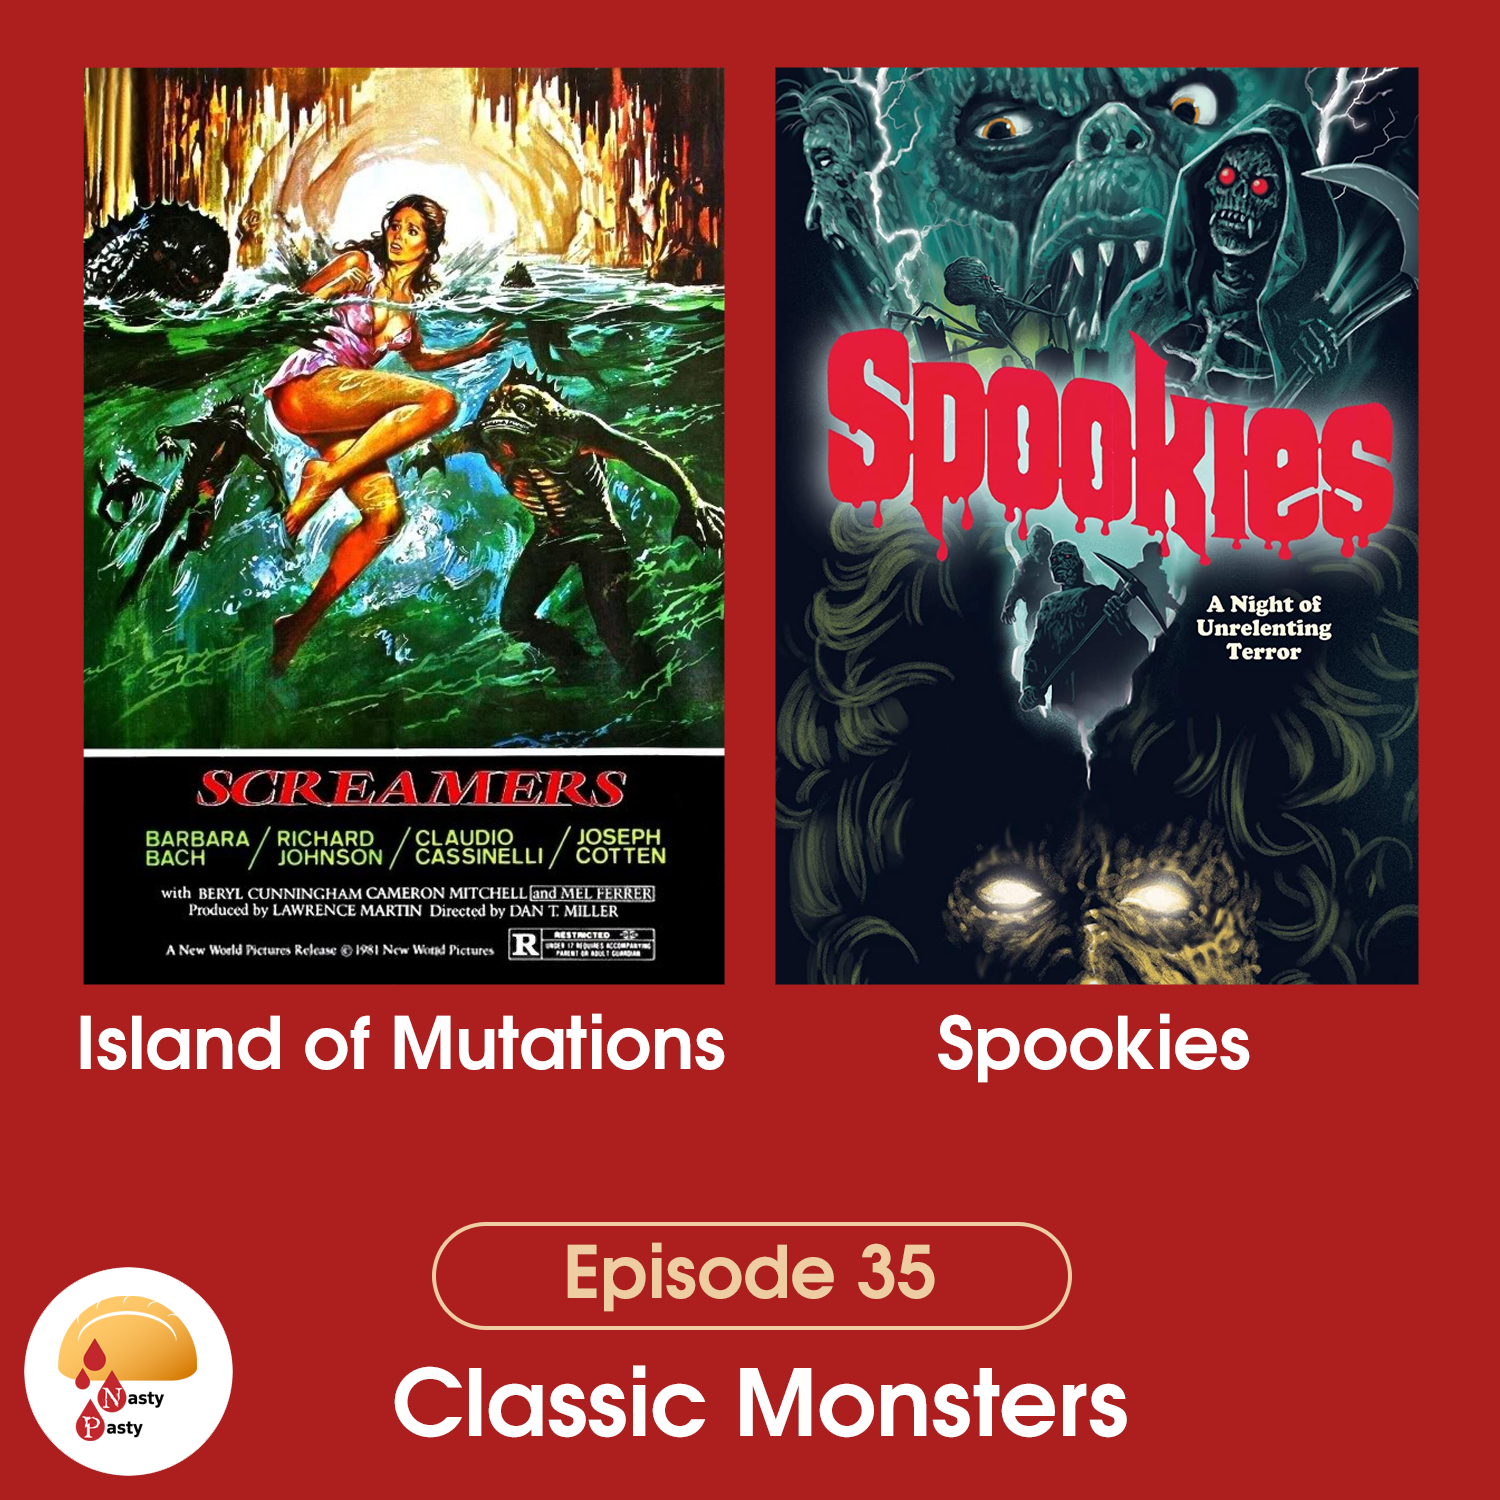 Episode 35: Classic Monsters